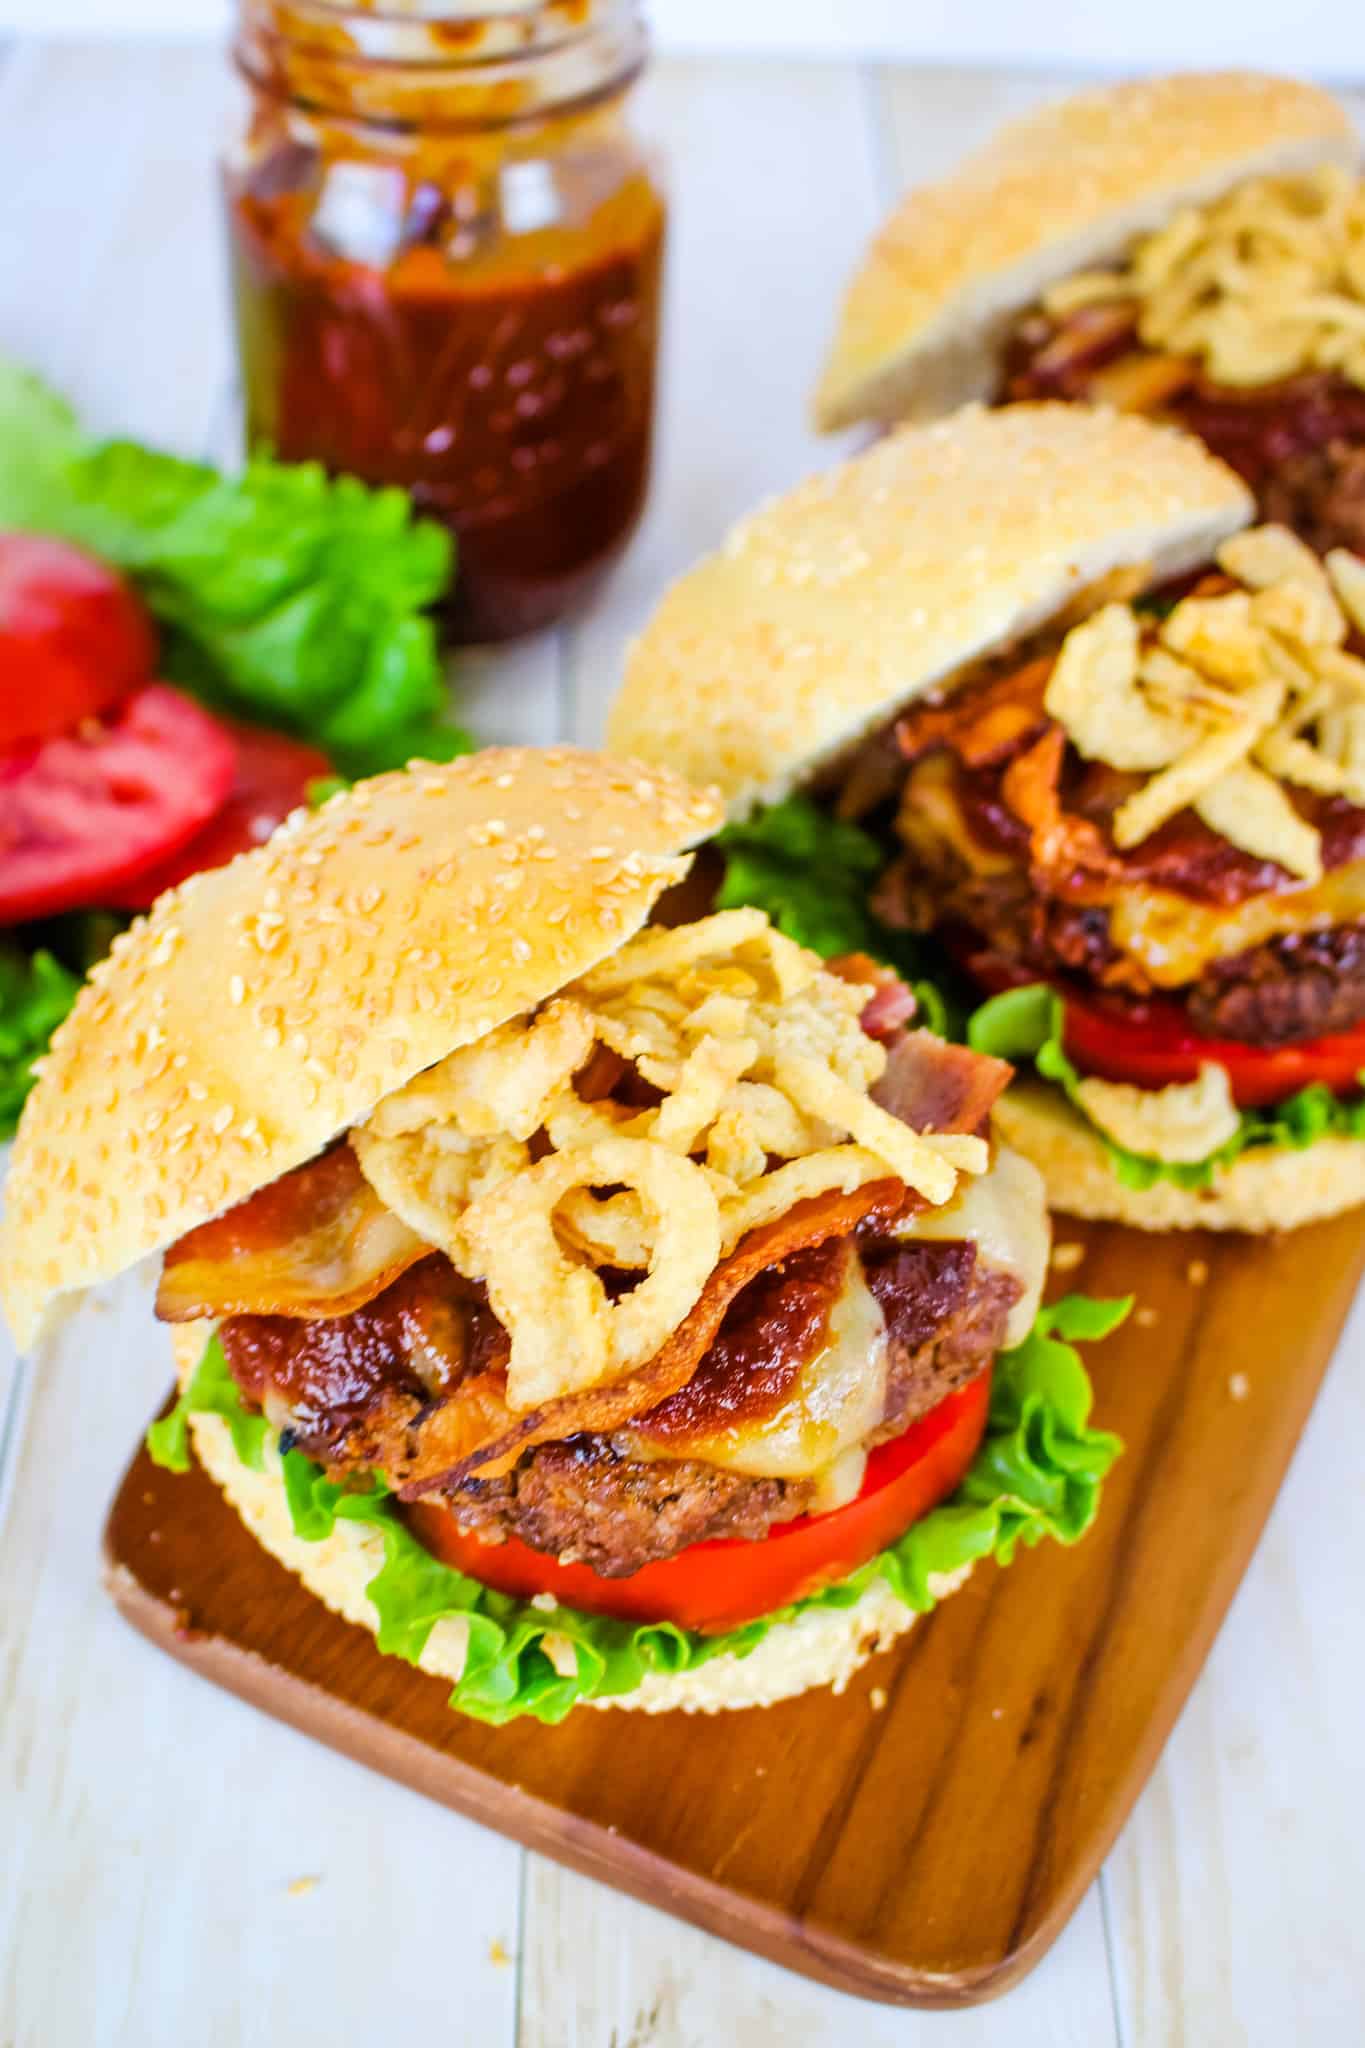 BBQ bacon burgers topped with cheese, bbq sauce, bacon and French fried onions.